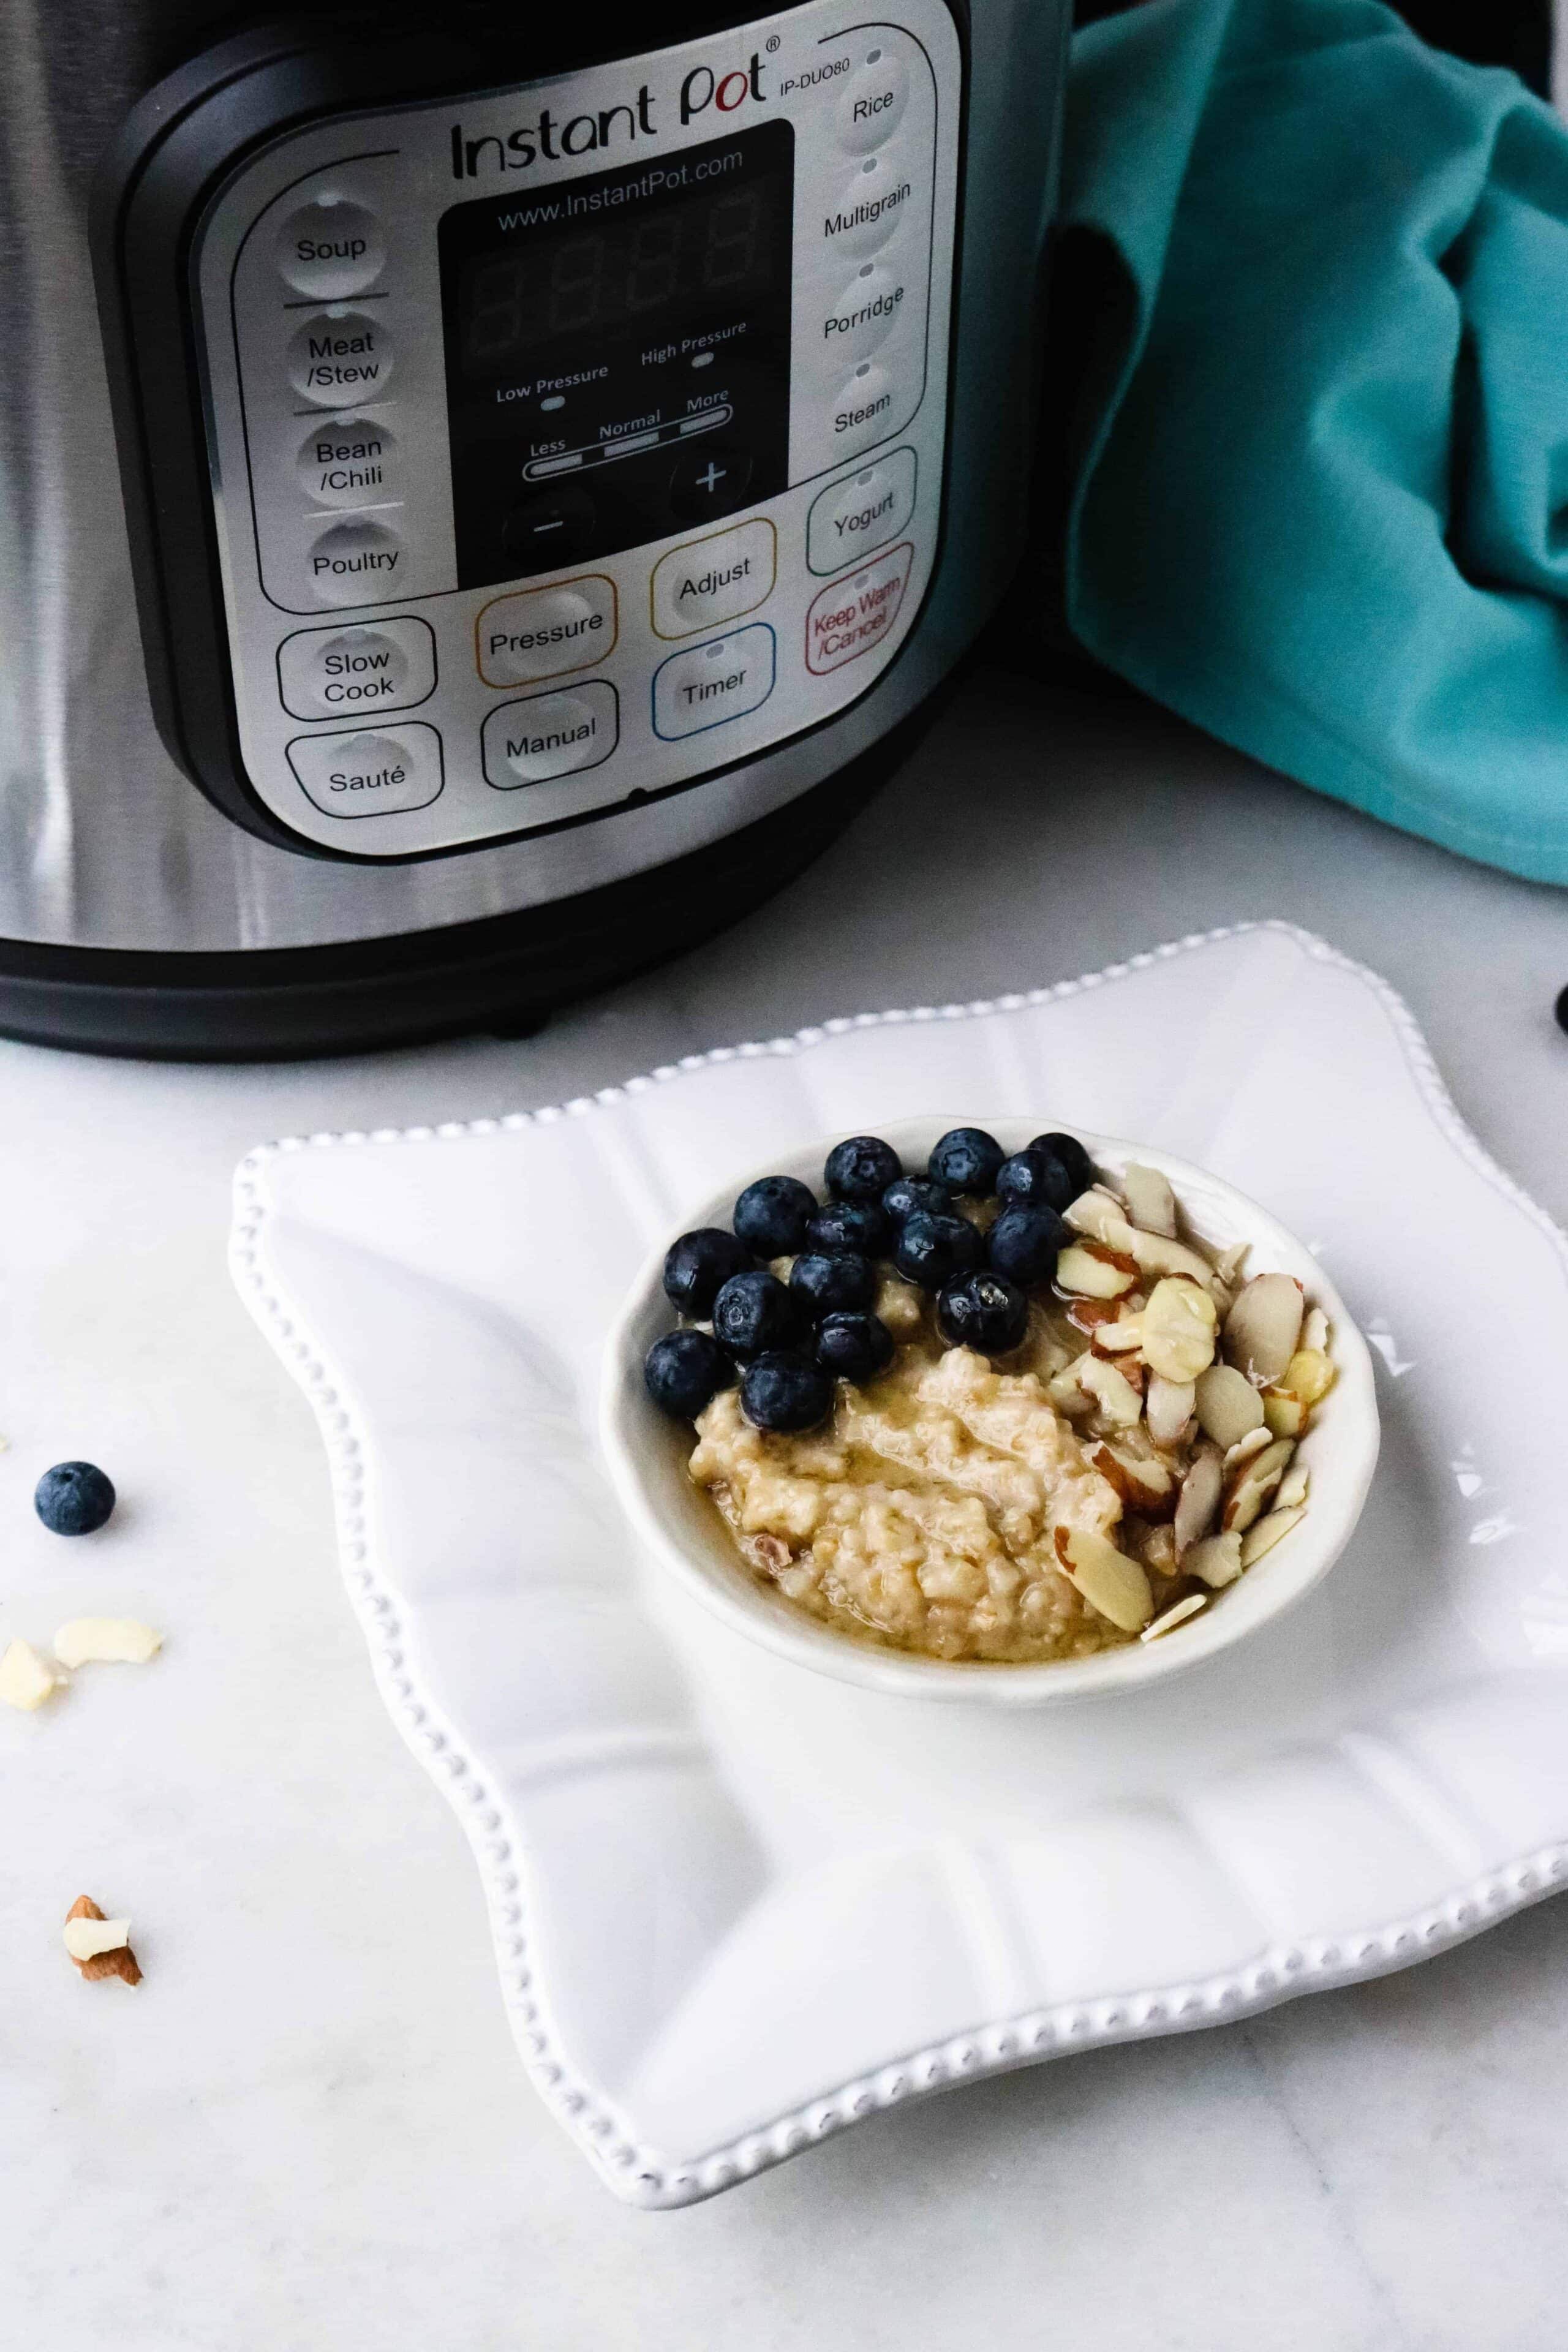 Oatmeal topped with blueberries, almonds and honey served in a white bowl on a square white plate